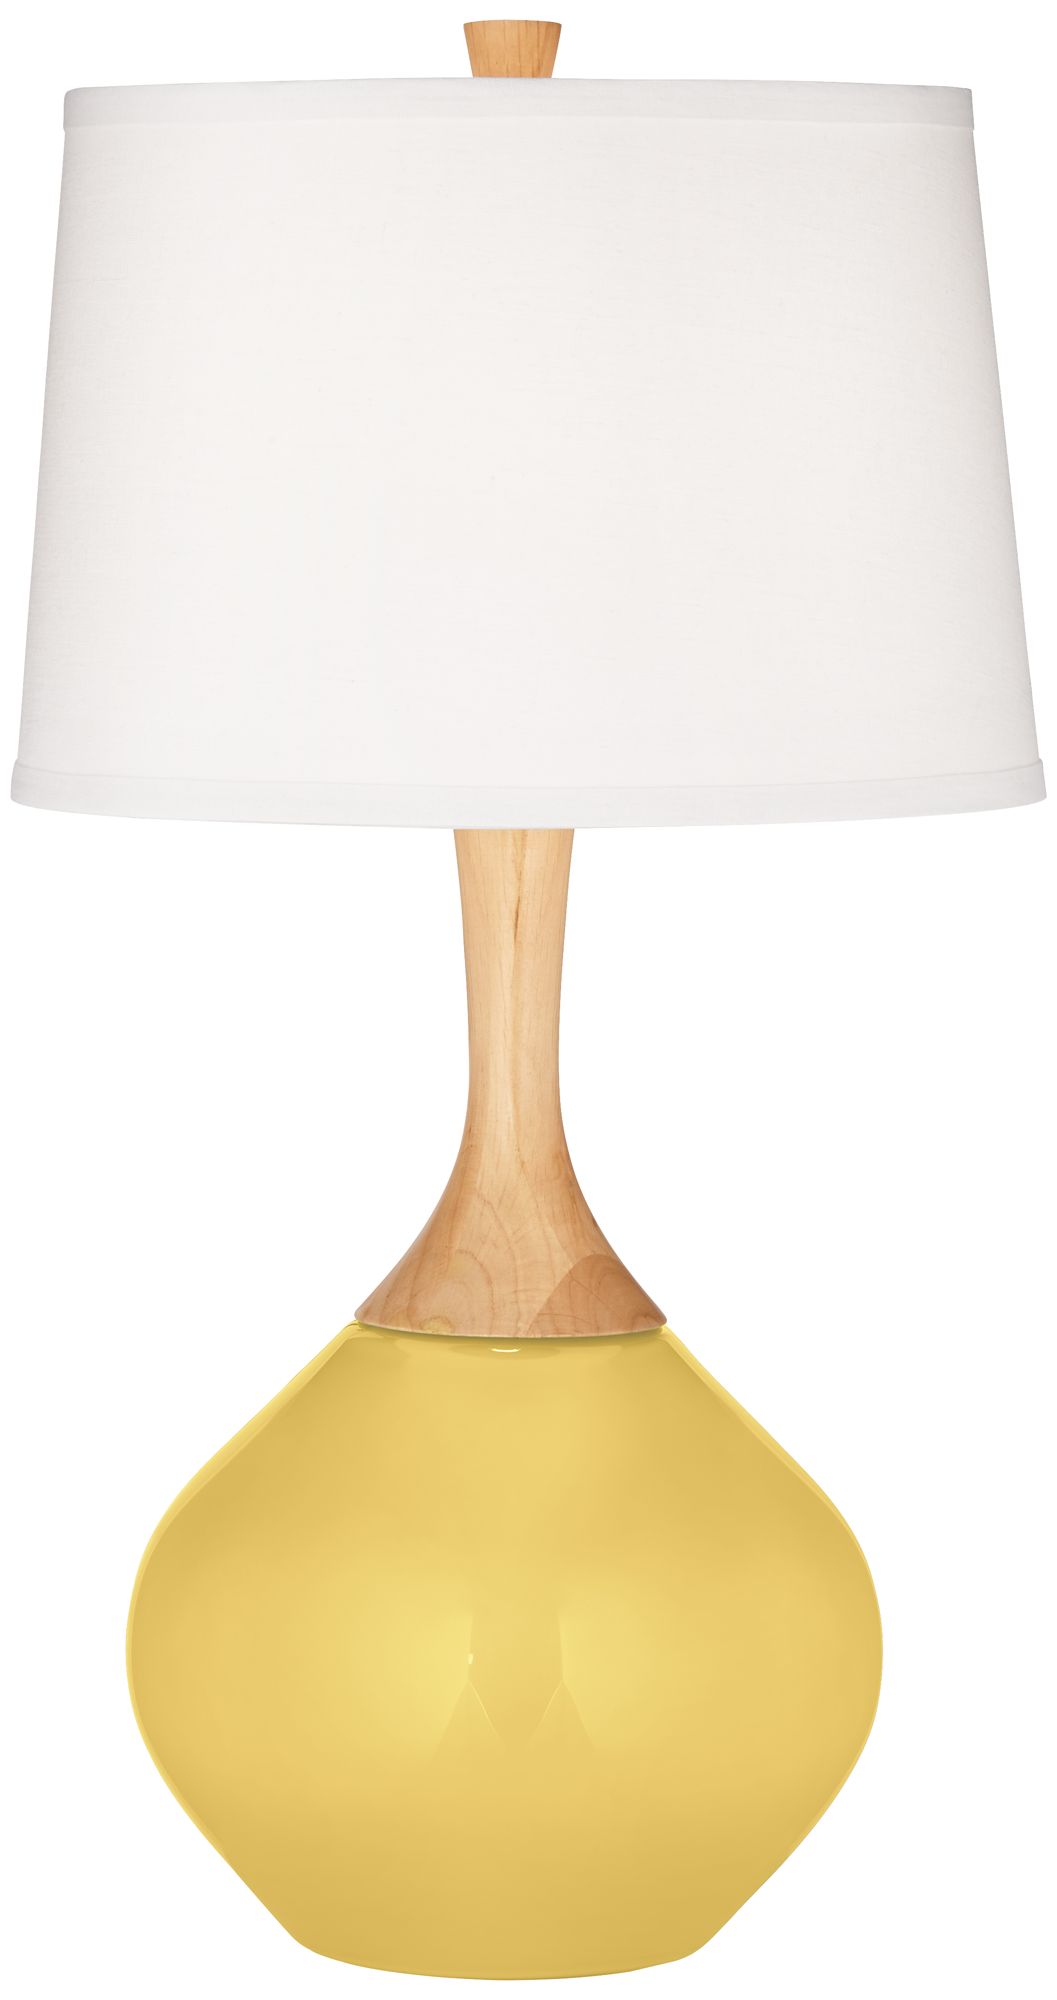 Color Plus Wexler Modern Table Lamp 31" Tall Daffodil Yellow Glass Wood Neck White Drum Shade for Bedroom Living Room Bedside Nightstand Office Kids - image 2 of 6